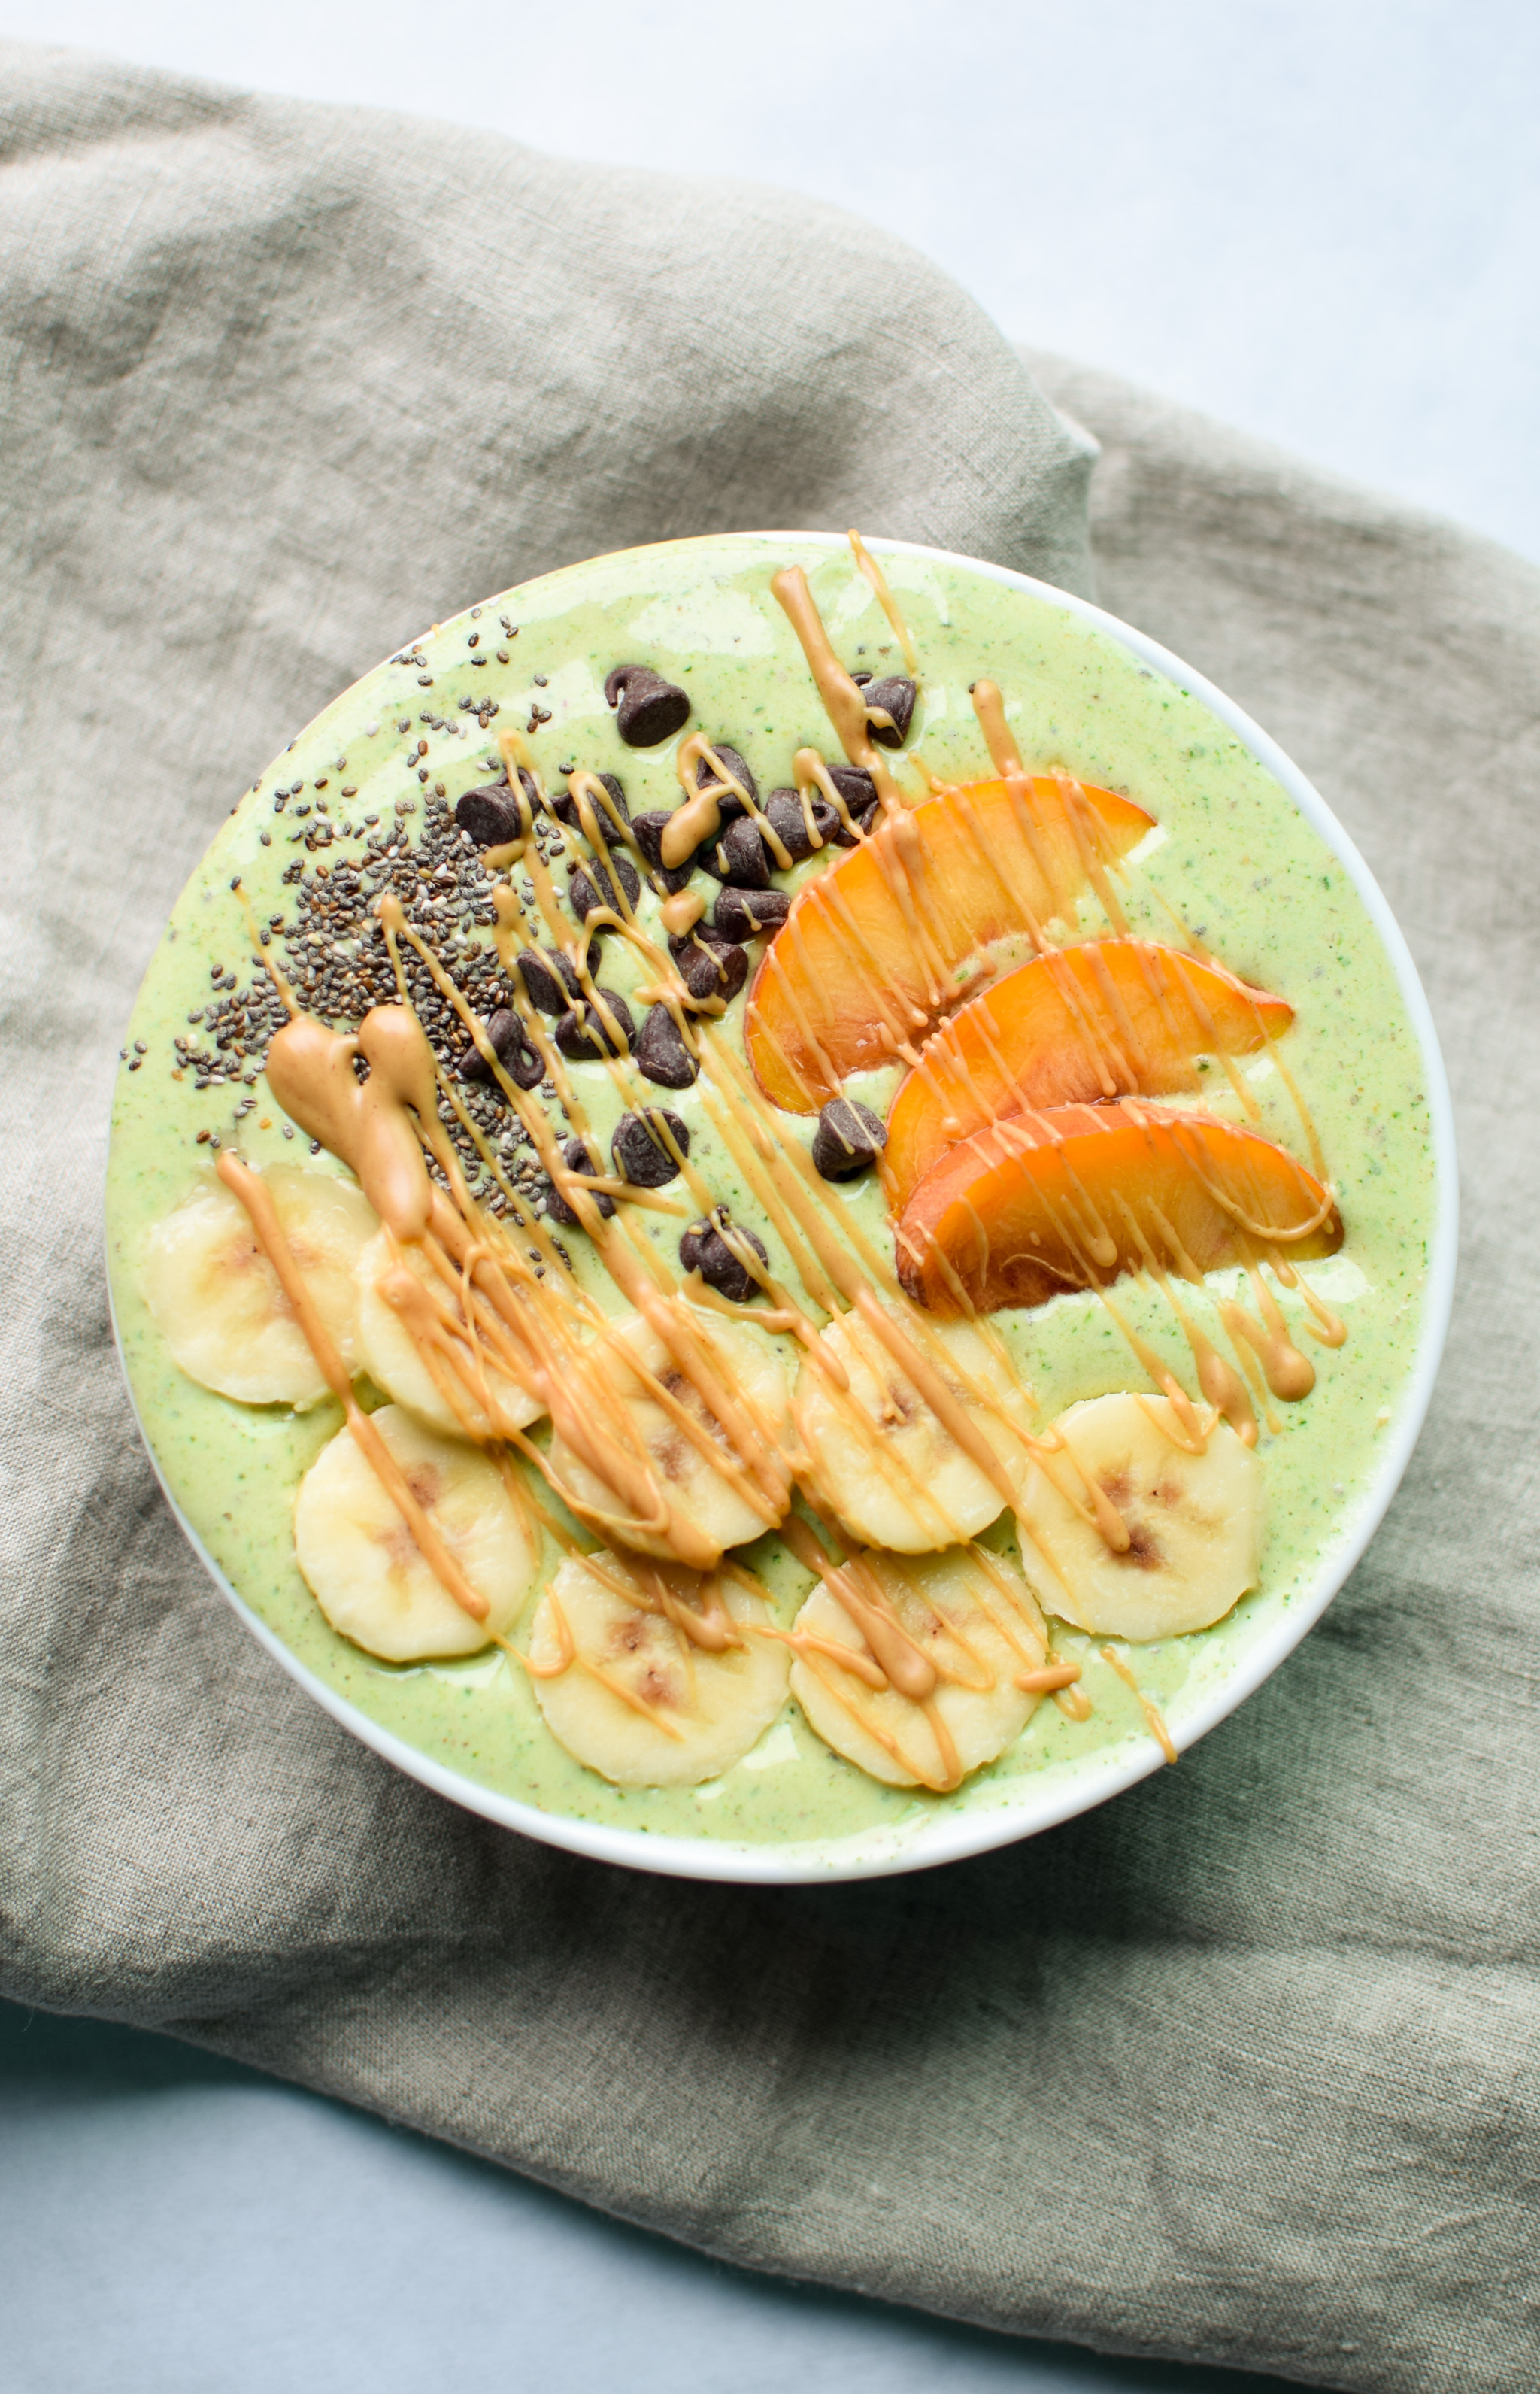 Peaches and Green Protein Smoothie recipe - power greens, peaches, bananas plus protein! Easy smoothie recipe on ProjectMealPlan.com!